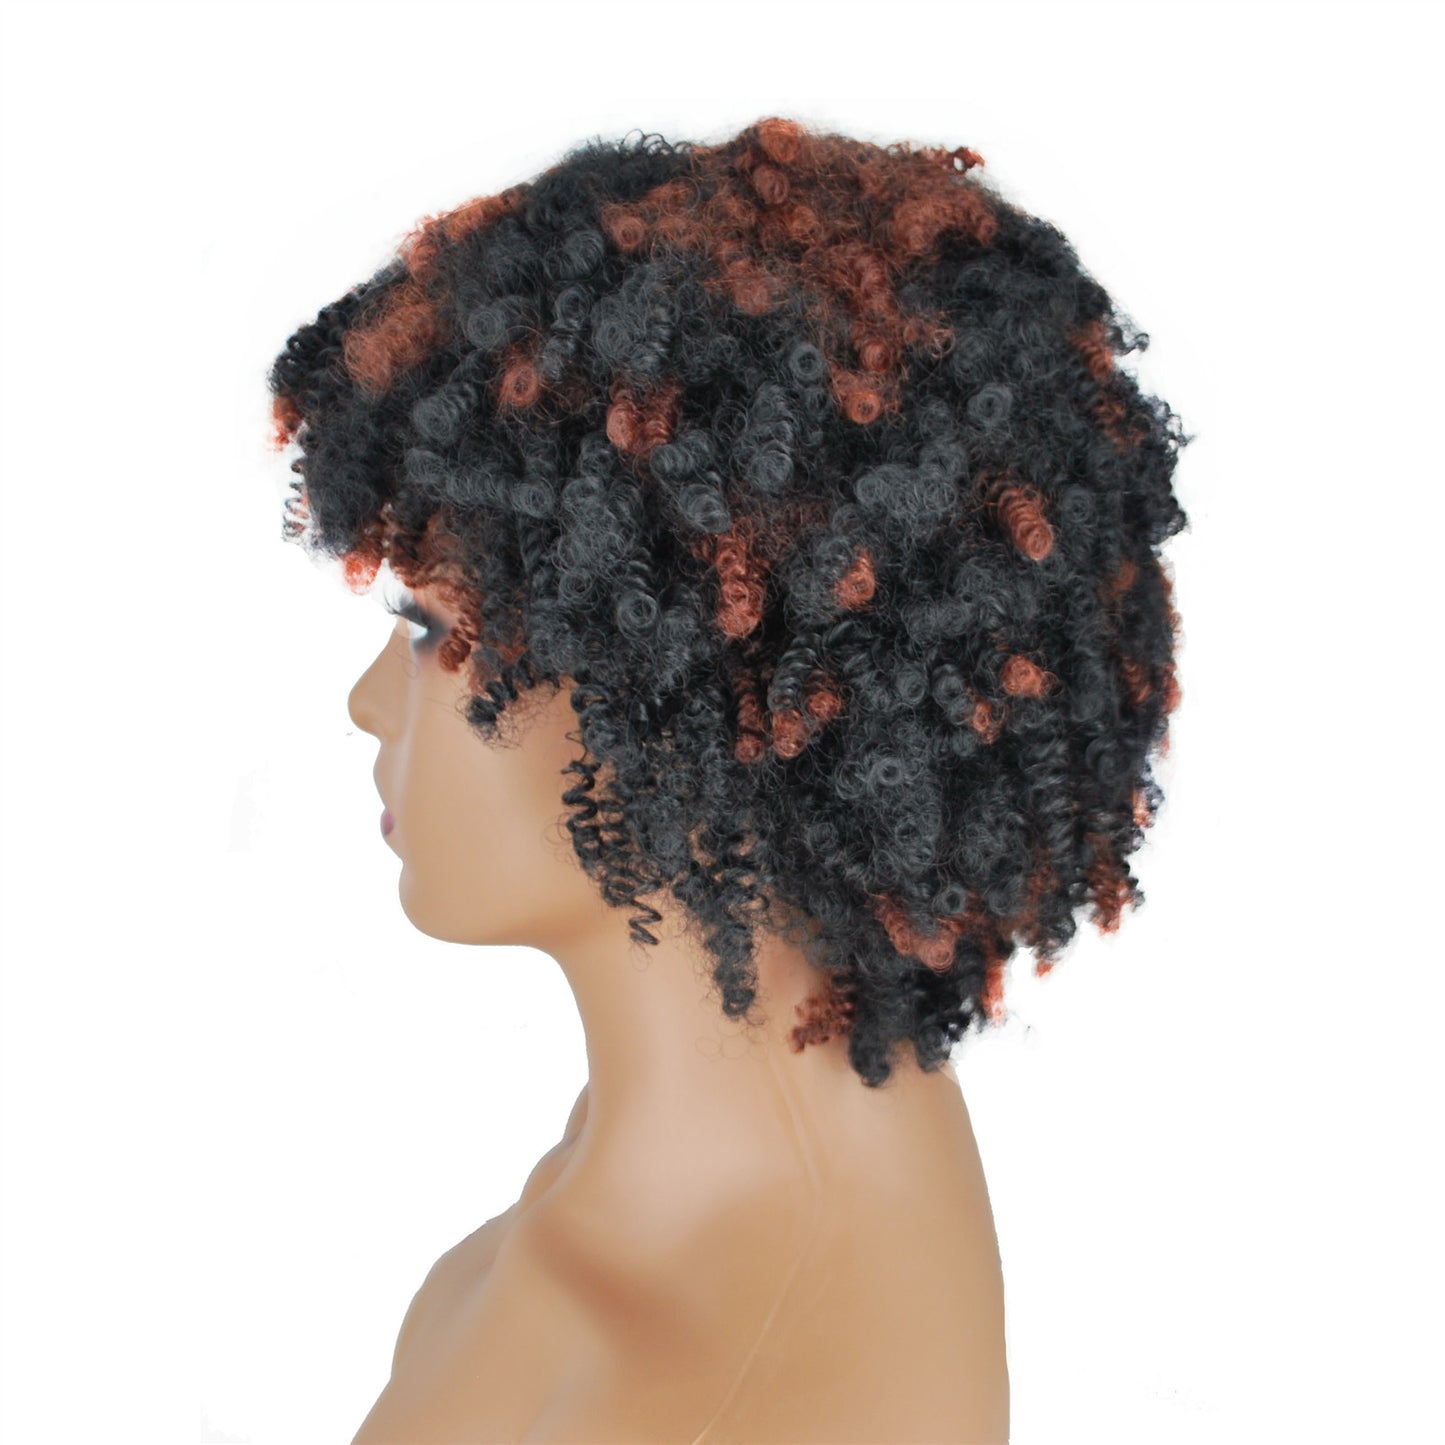 Synthetic Short Kinky Curly Wigs for Women Black And Red Wig with Bangs Synthetic Heat Resistant Hair Wig for Daily Use